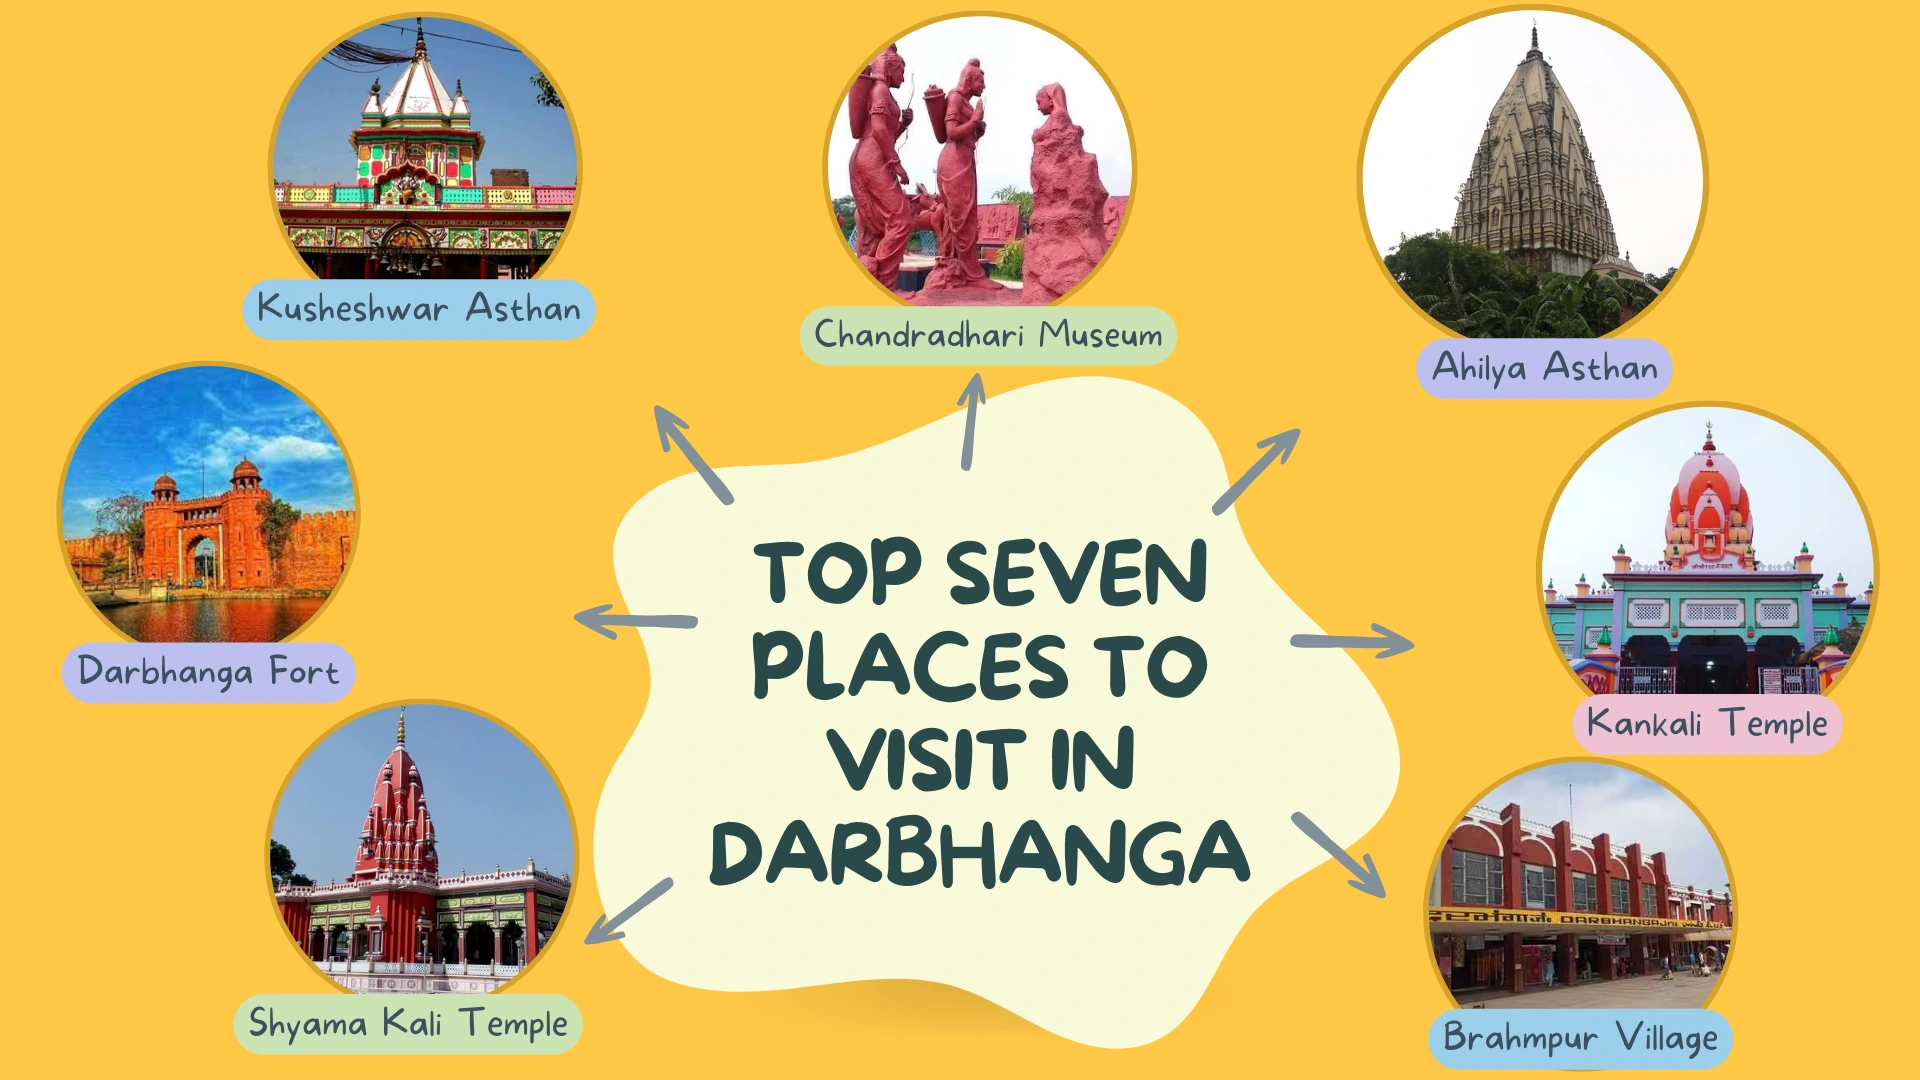 Top 7 places to visit in Darbhanga